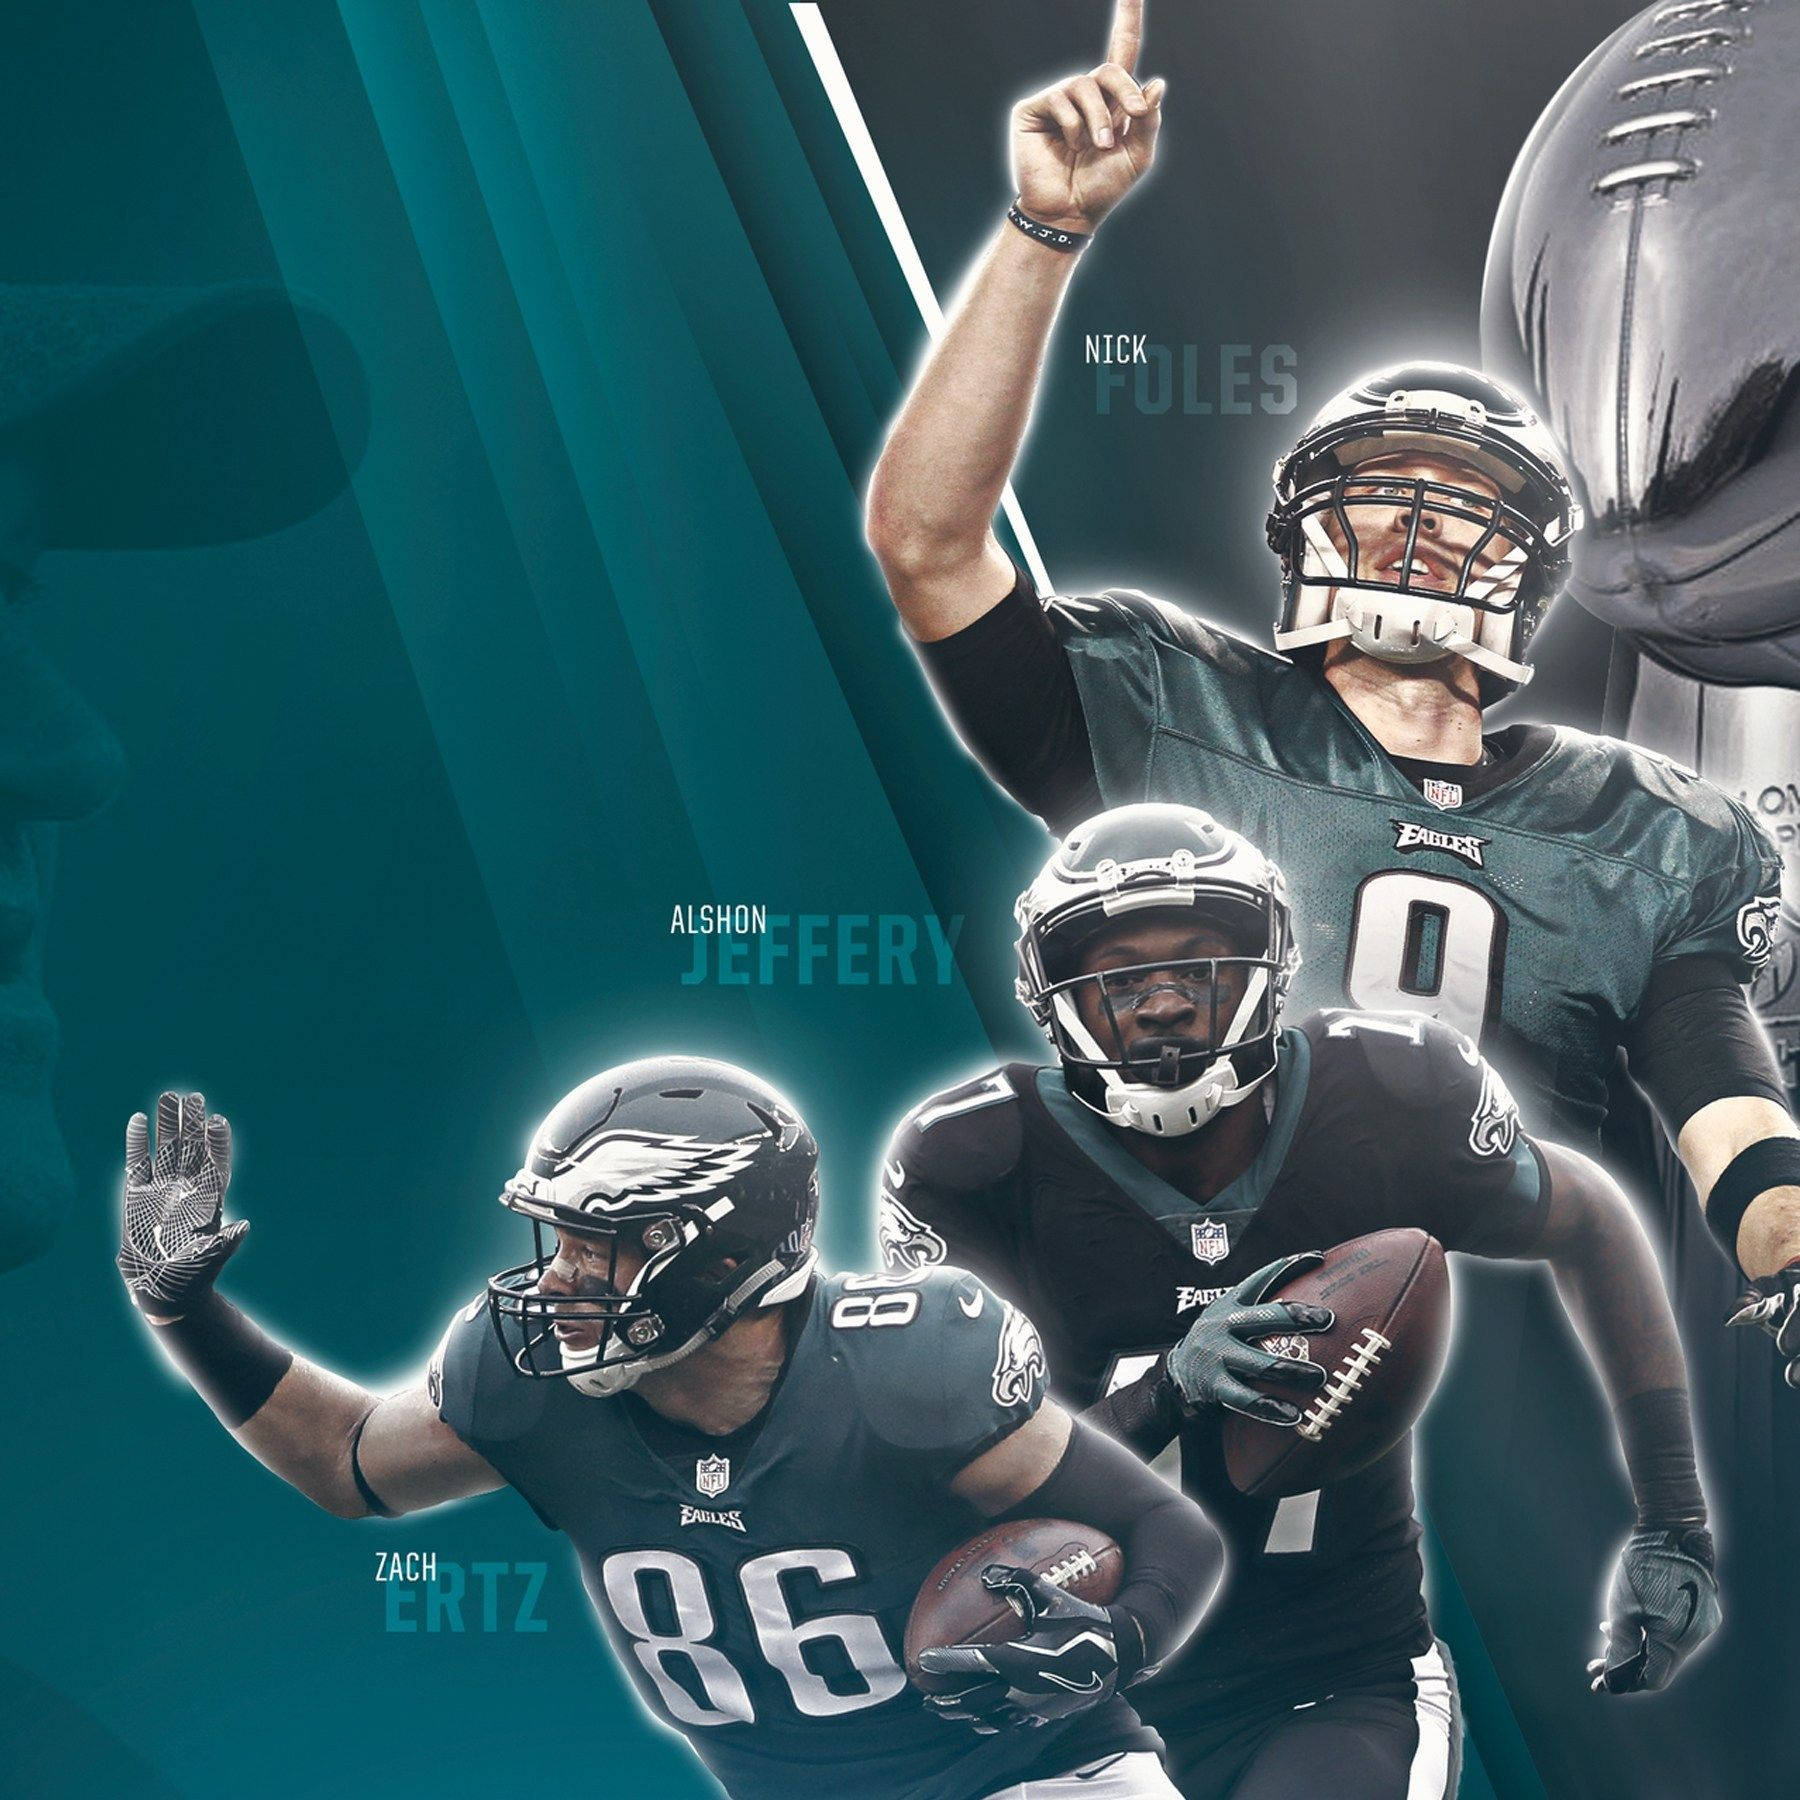 Eagles Football HD Wallpaper For iPhone - 2023 NFL Football Wallpapers   Philadelphia eagles wallpaper, Eagles football, Nfl football wallpaper